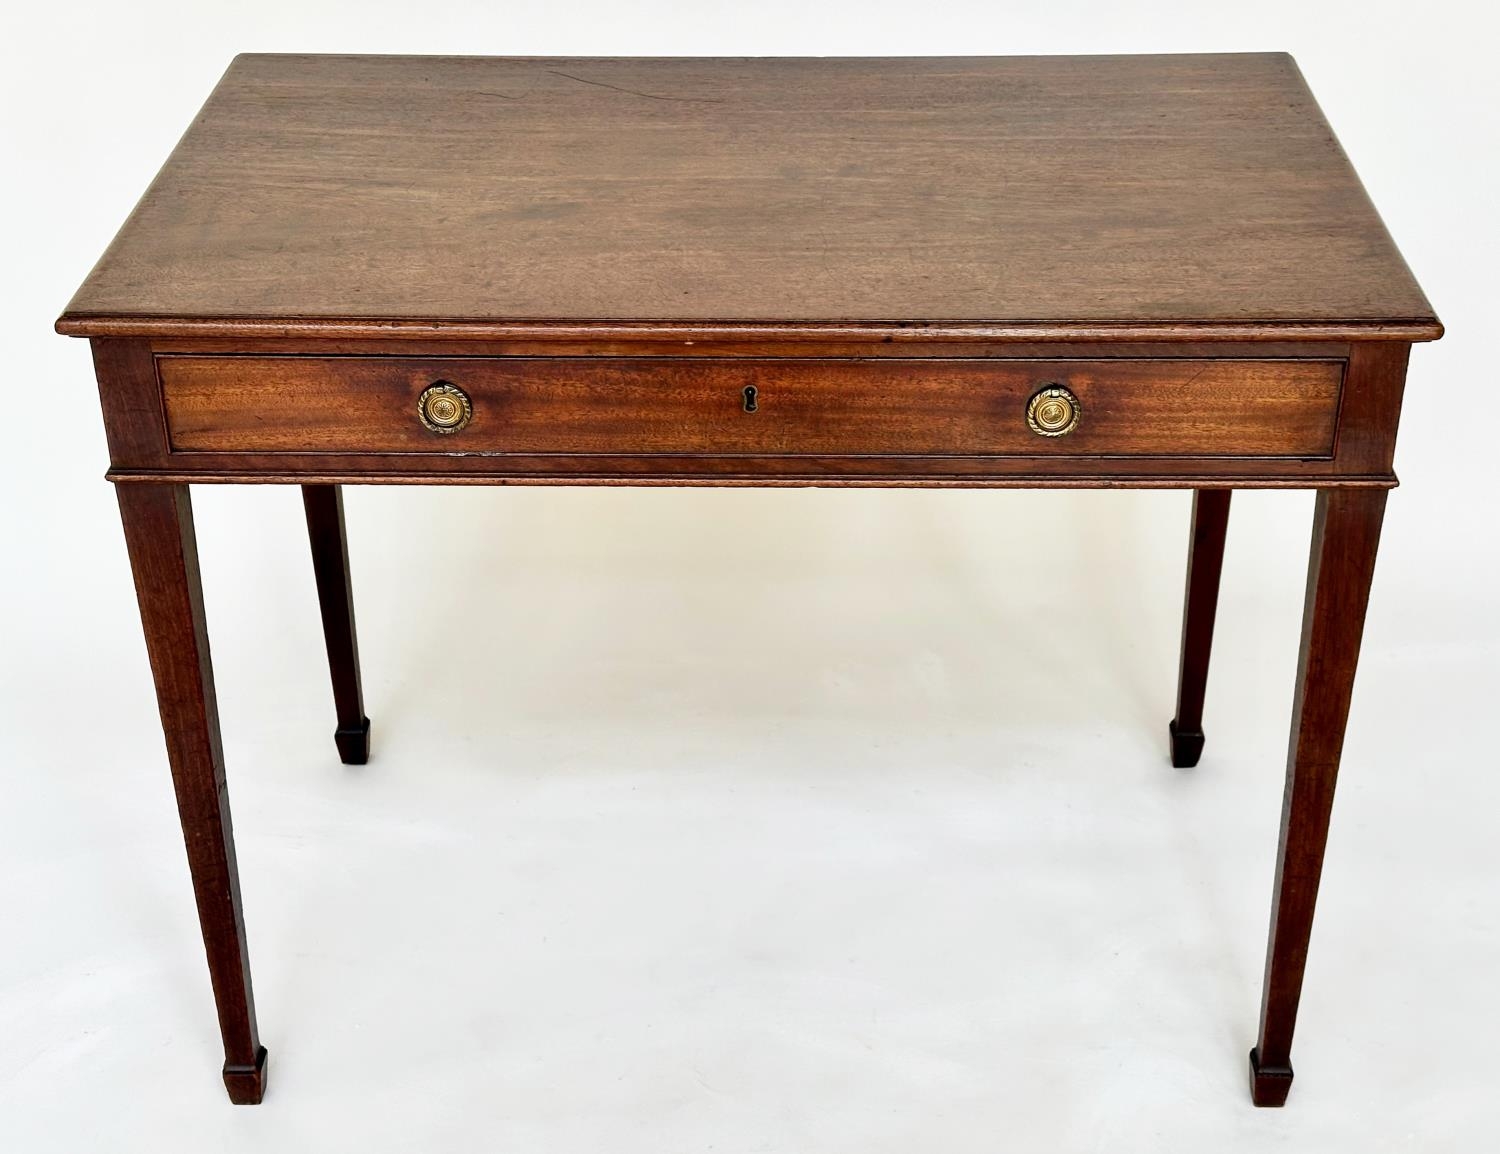 WRITING TABLE, George III period mahogany with full width frieze drawer and square tapering